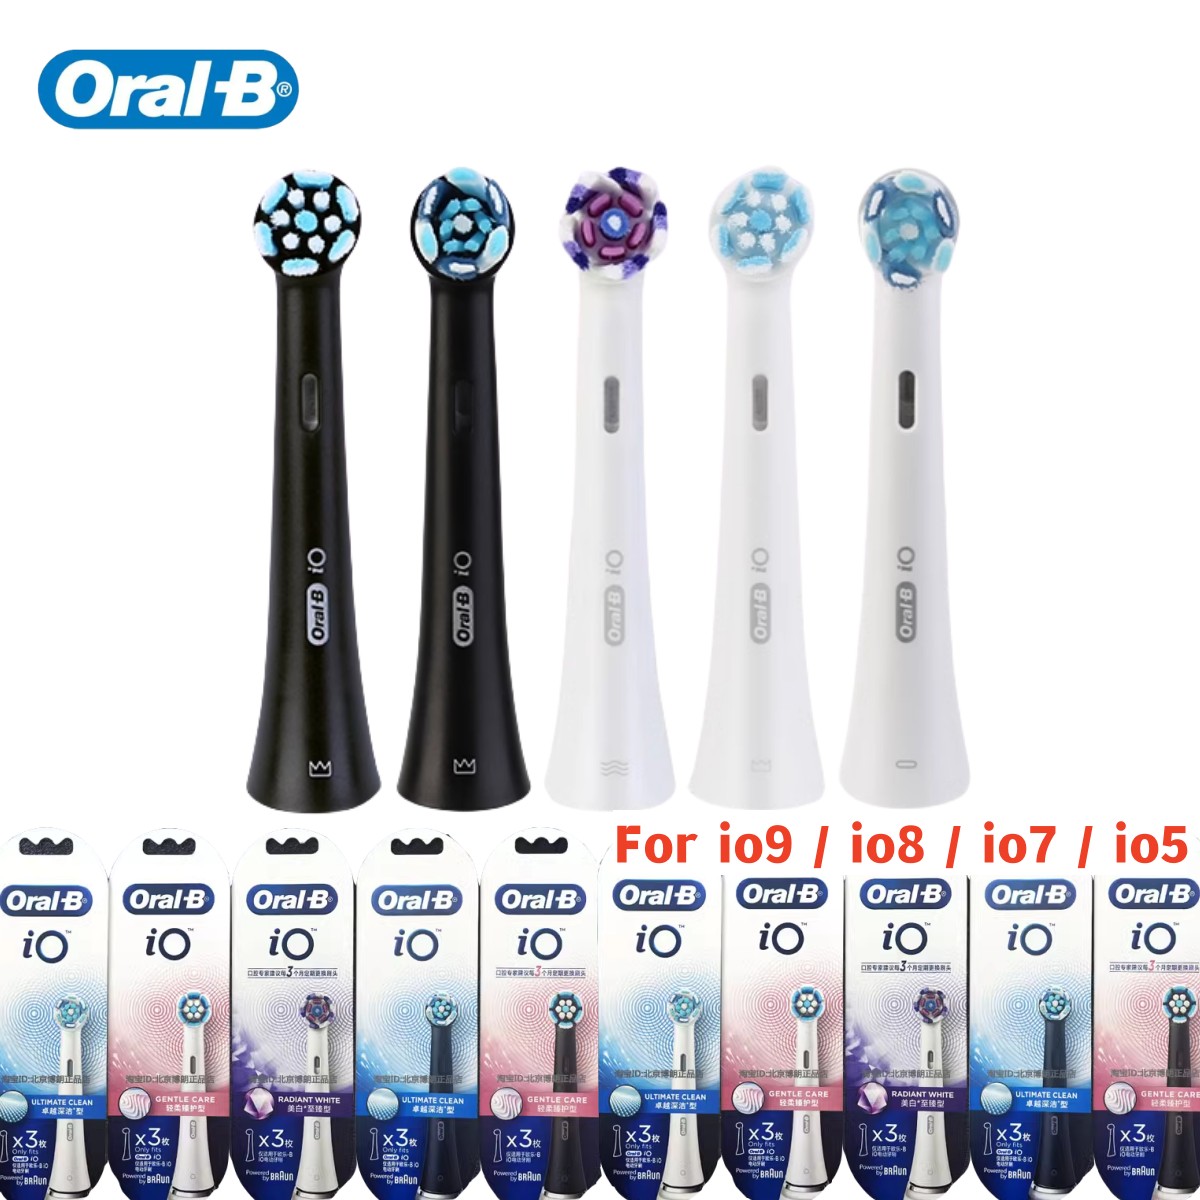 Original Oral B Replacement Brush Heads for Oral B iO Series Electric